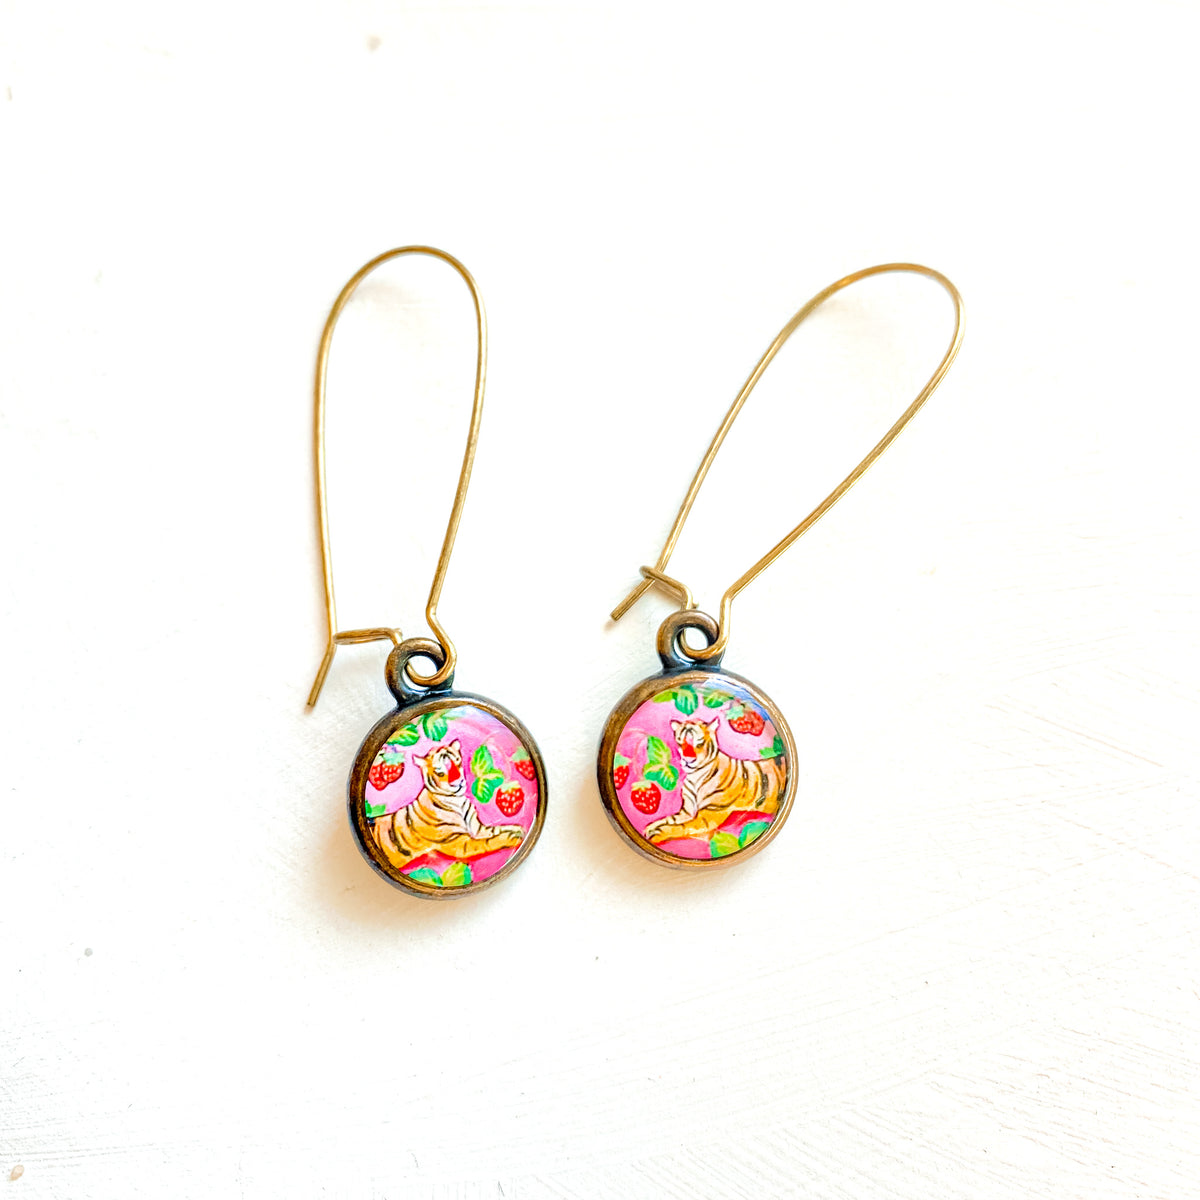 a pair of earrings with colorful designs on them